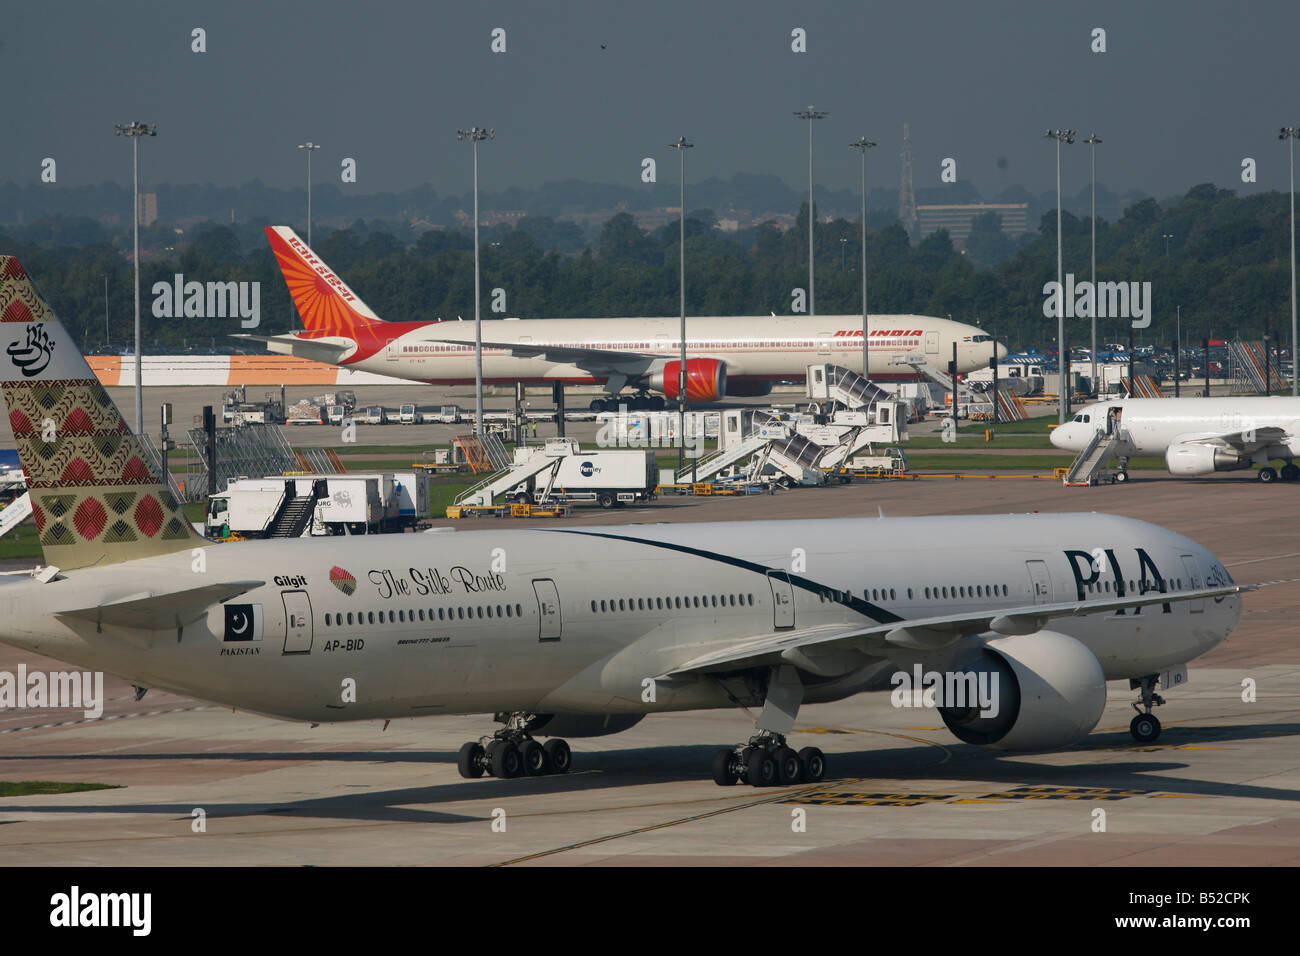 PIA and Air India International airlines at Manchester airport, UK Stock Photo